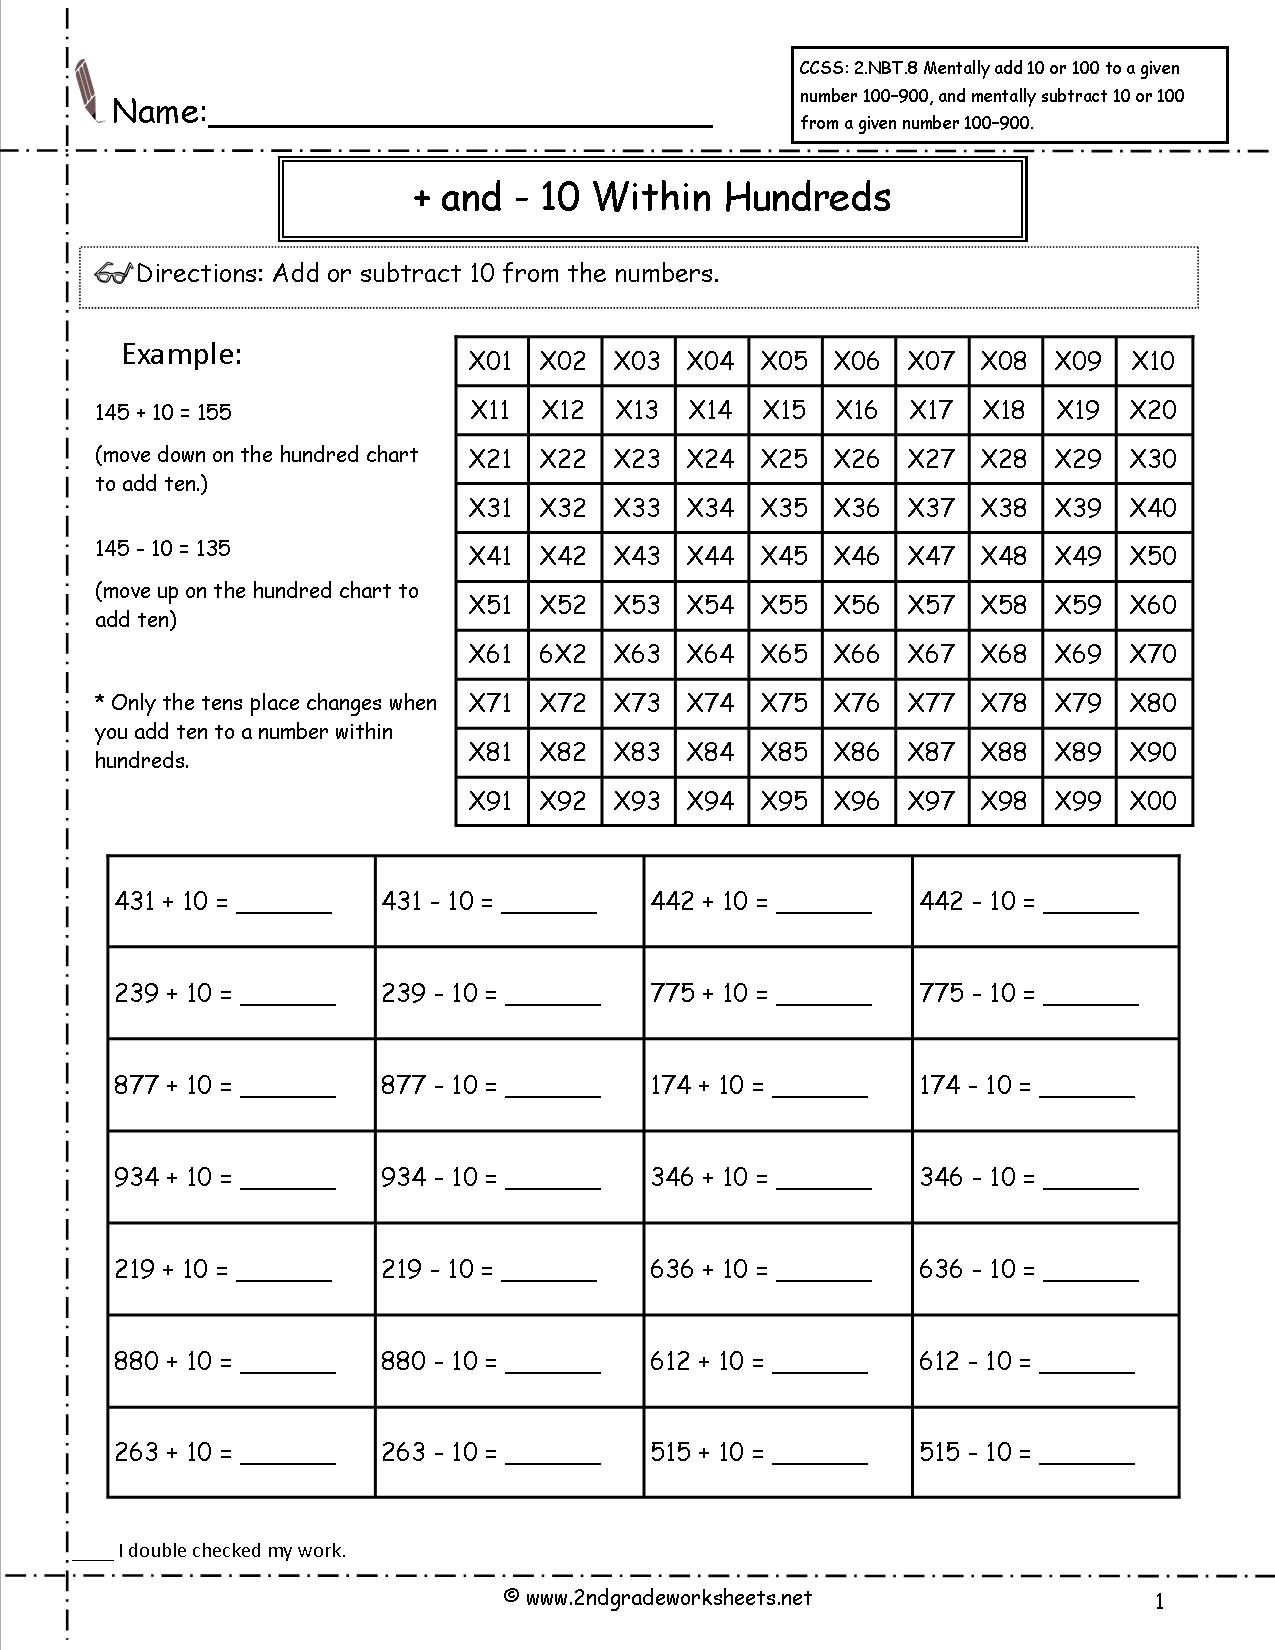 Adding and Subtracting 10 Worksheets